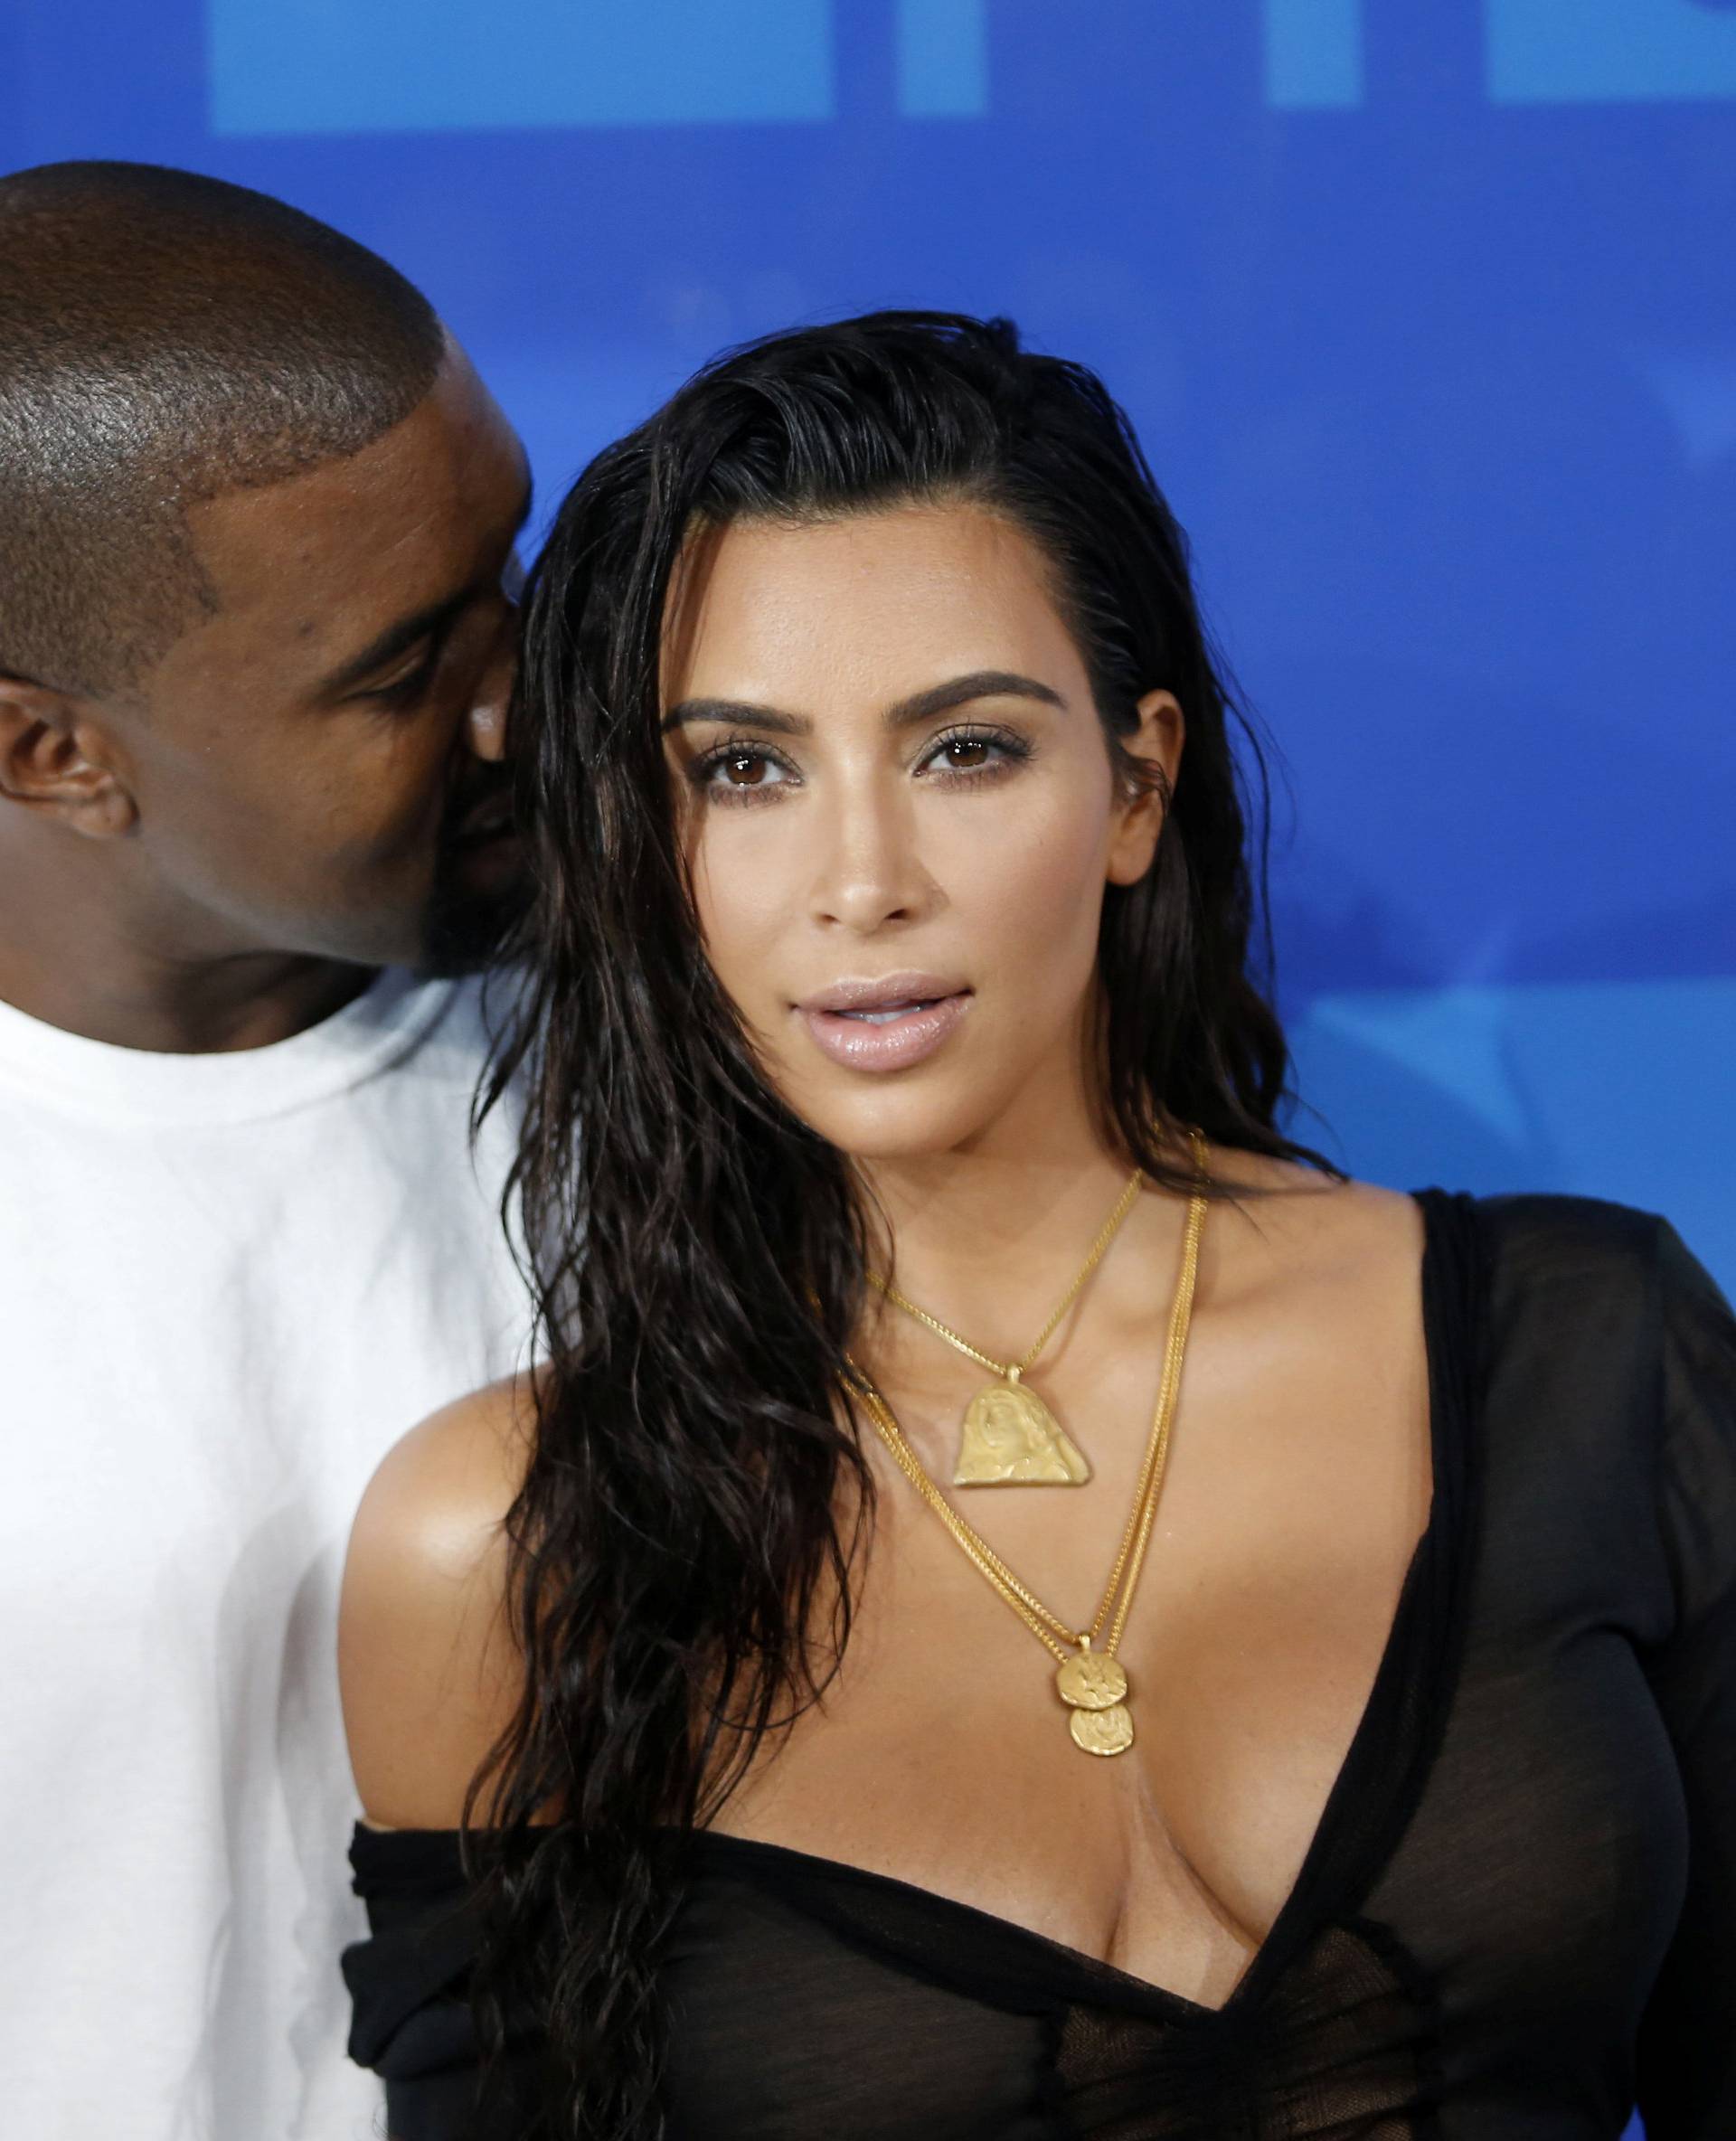 Kim Kardashian and Kanye West arrive at the 2016 MTV Video Music Awards in New York